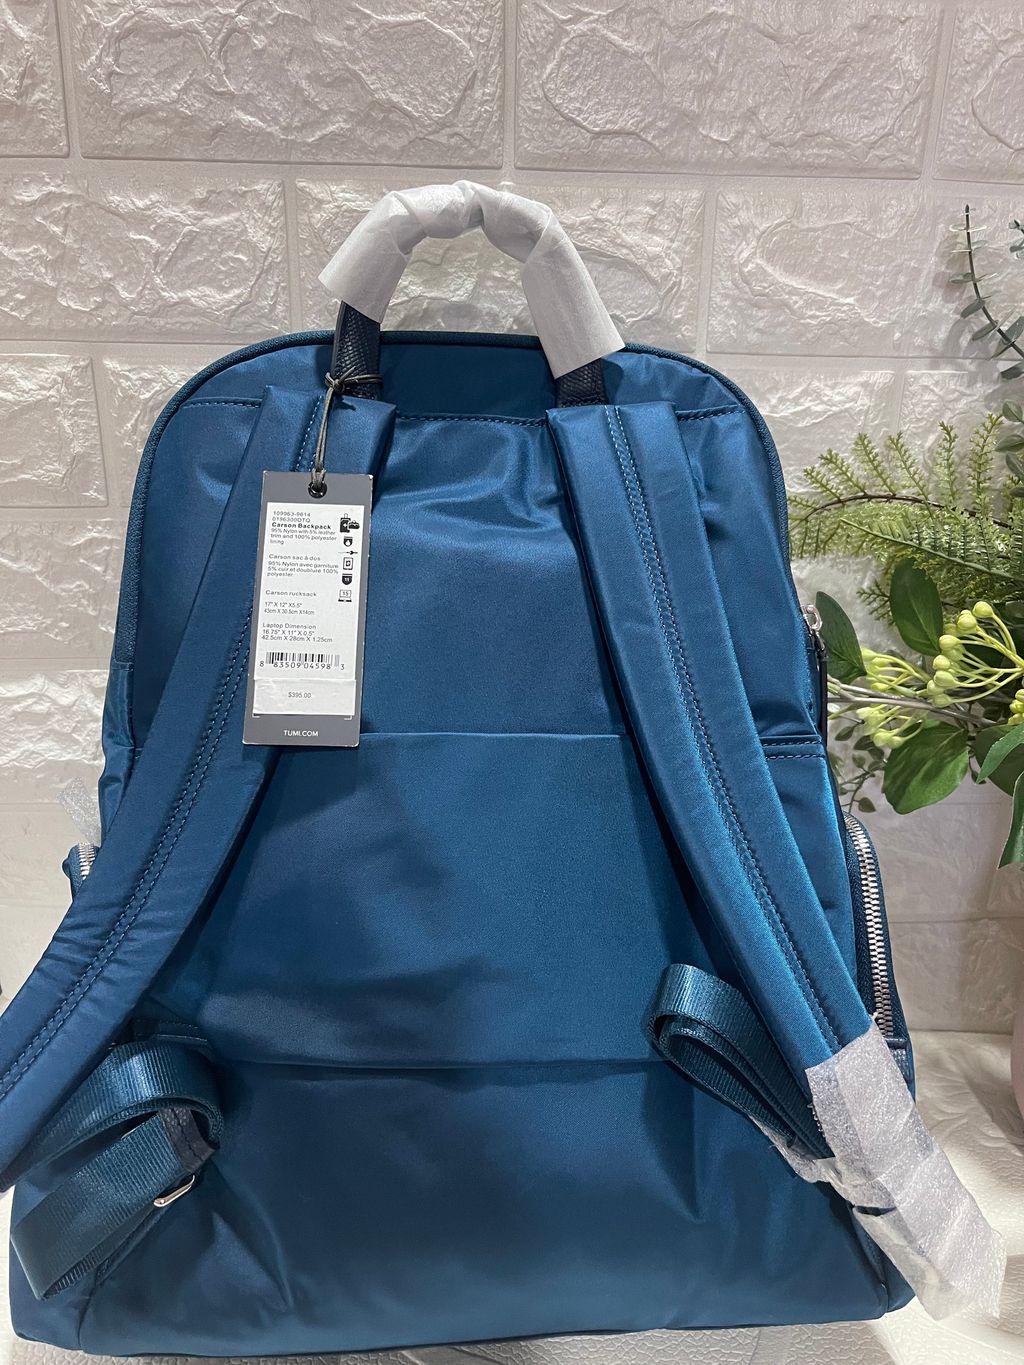 TUMI BACKPACK CARSON – USA With Love